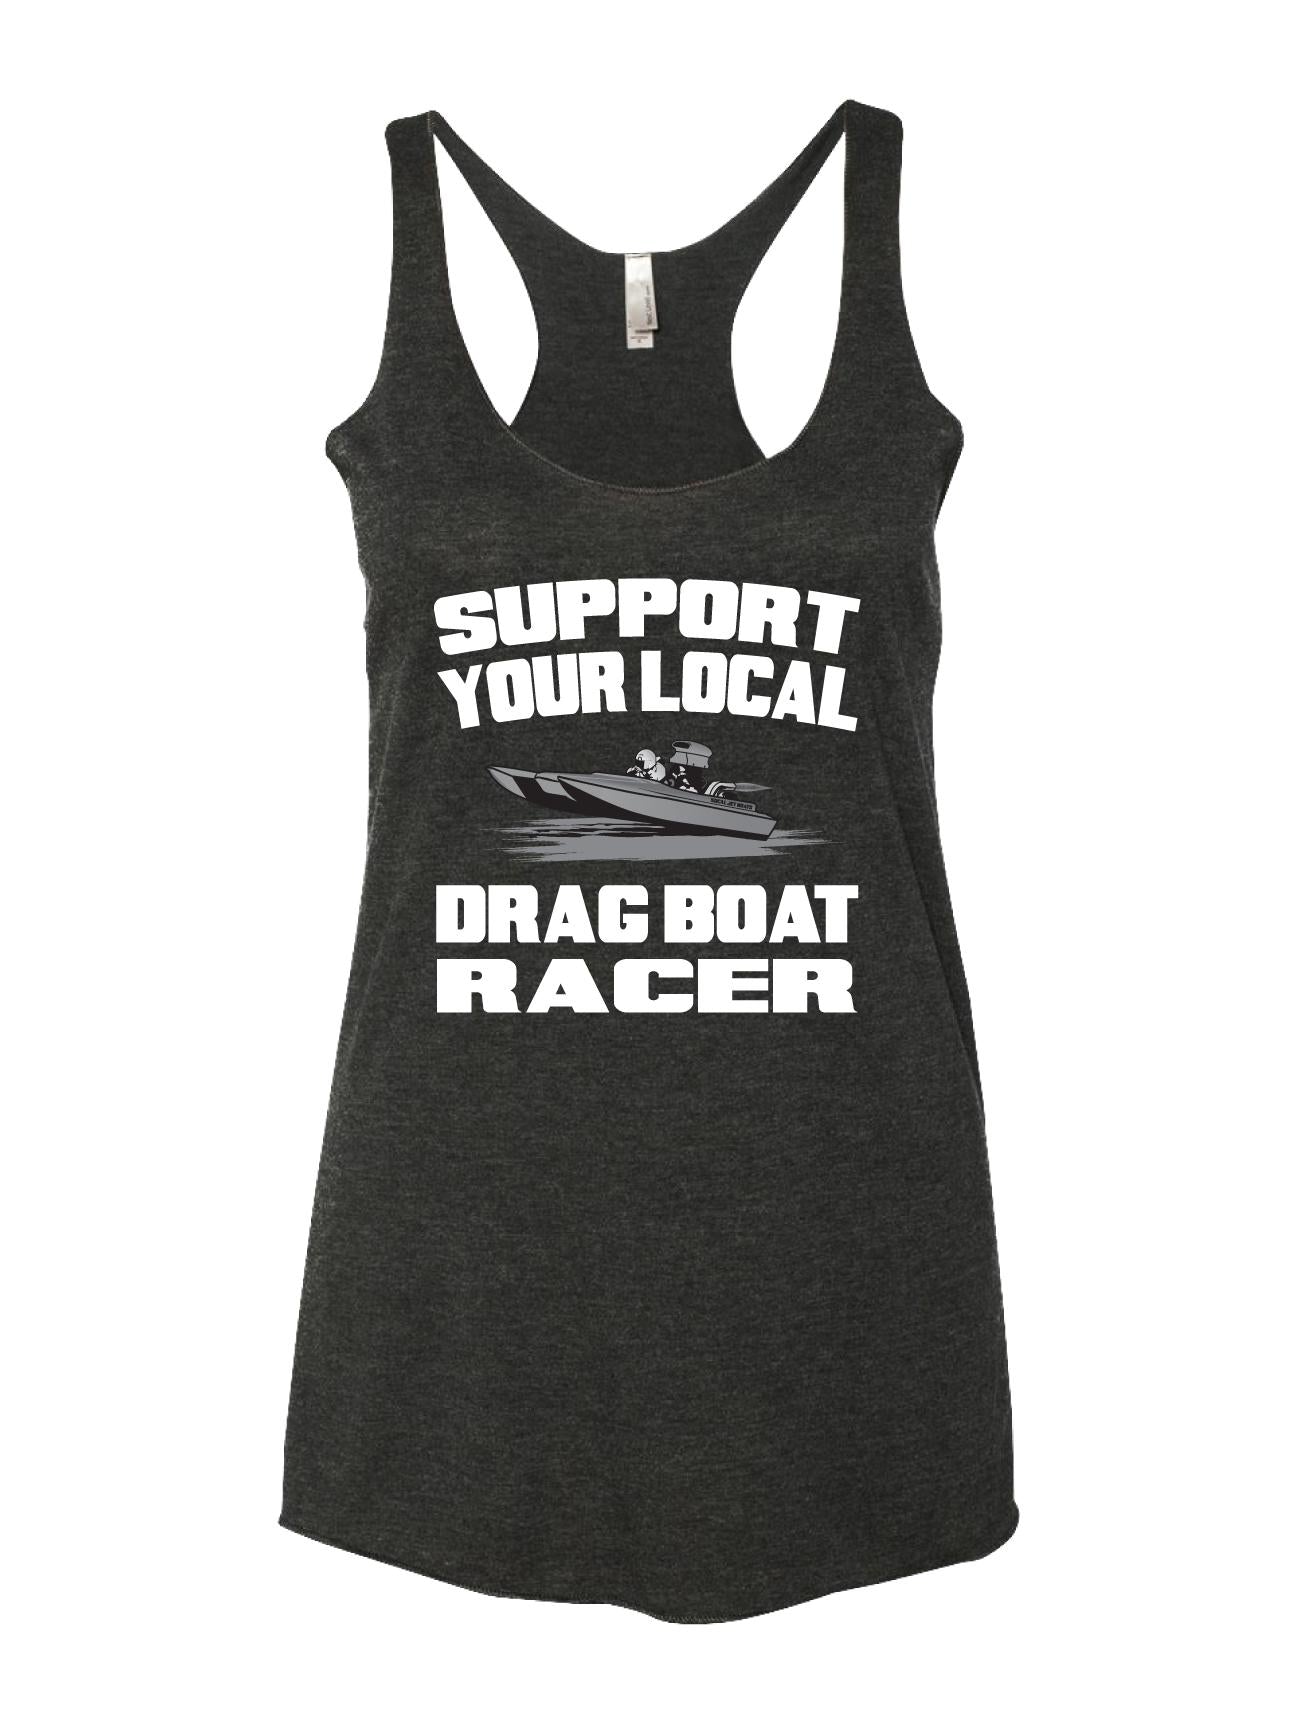 Support Your Local Drag Boat Racer - Womens Tank Top